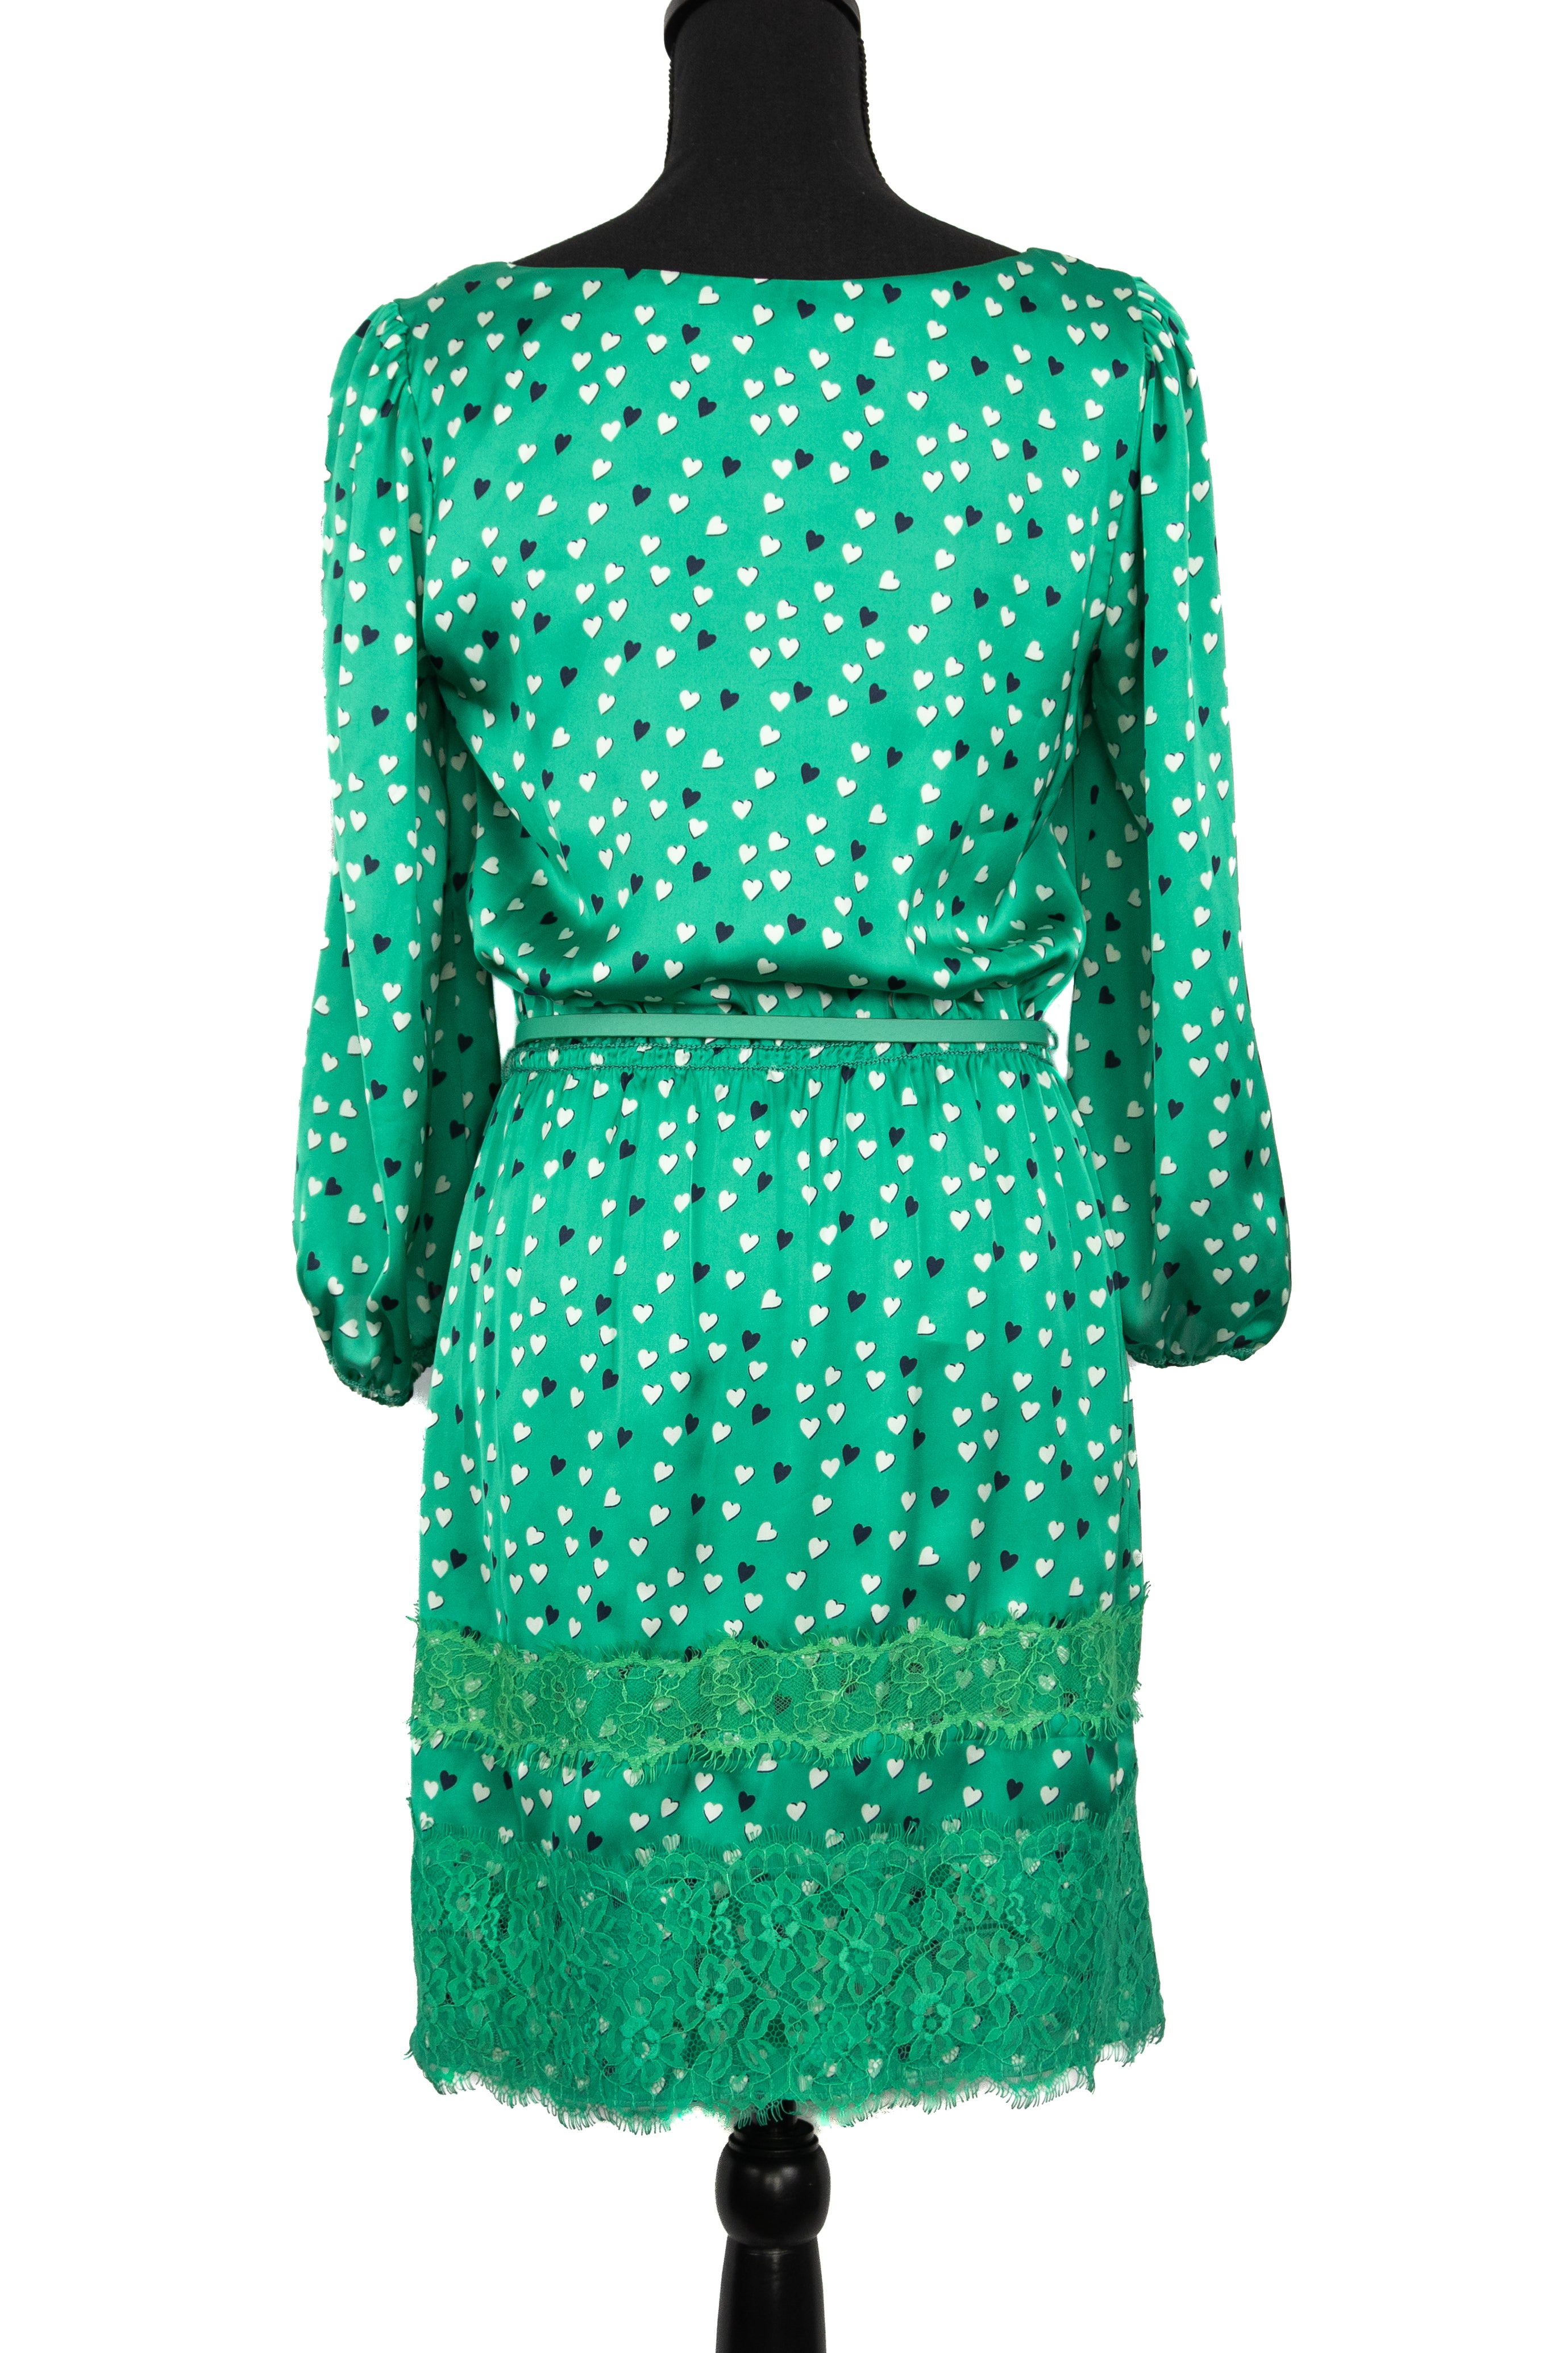 NWT Belted Heart Print Lace Hem Long Sleeve Green Dress - Size Small